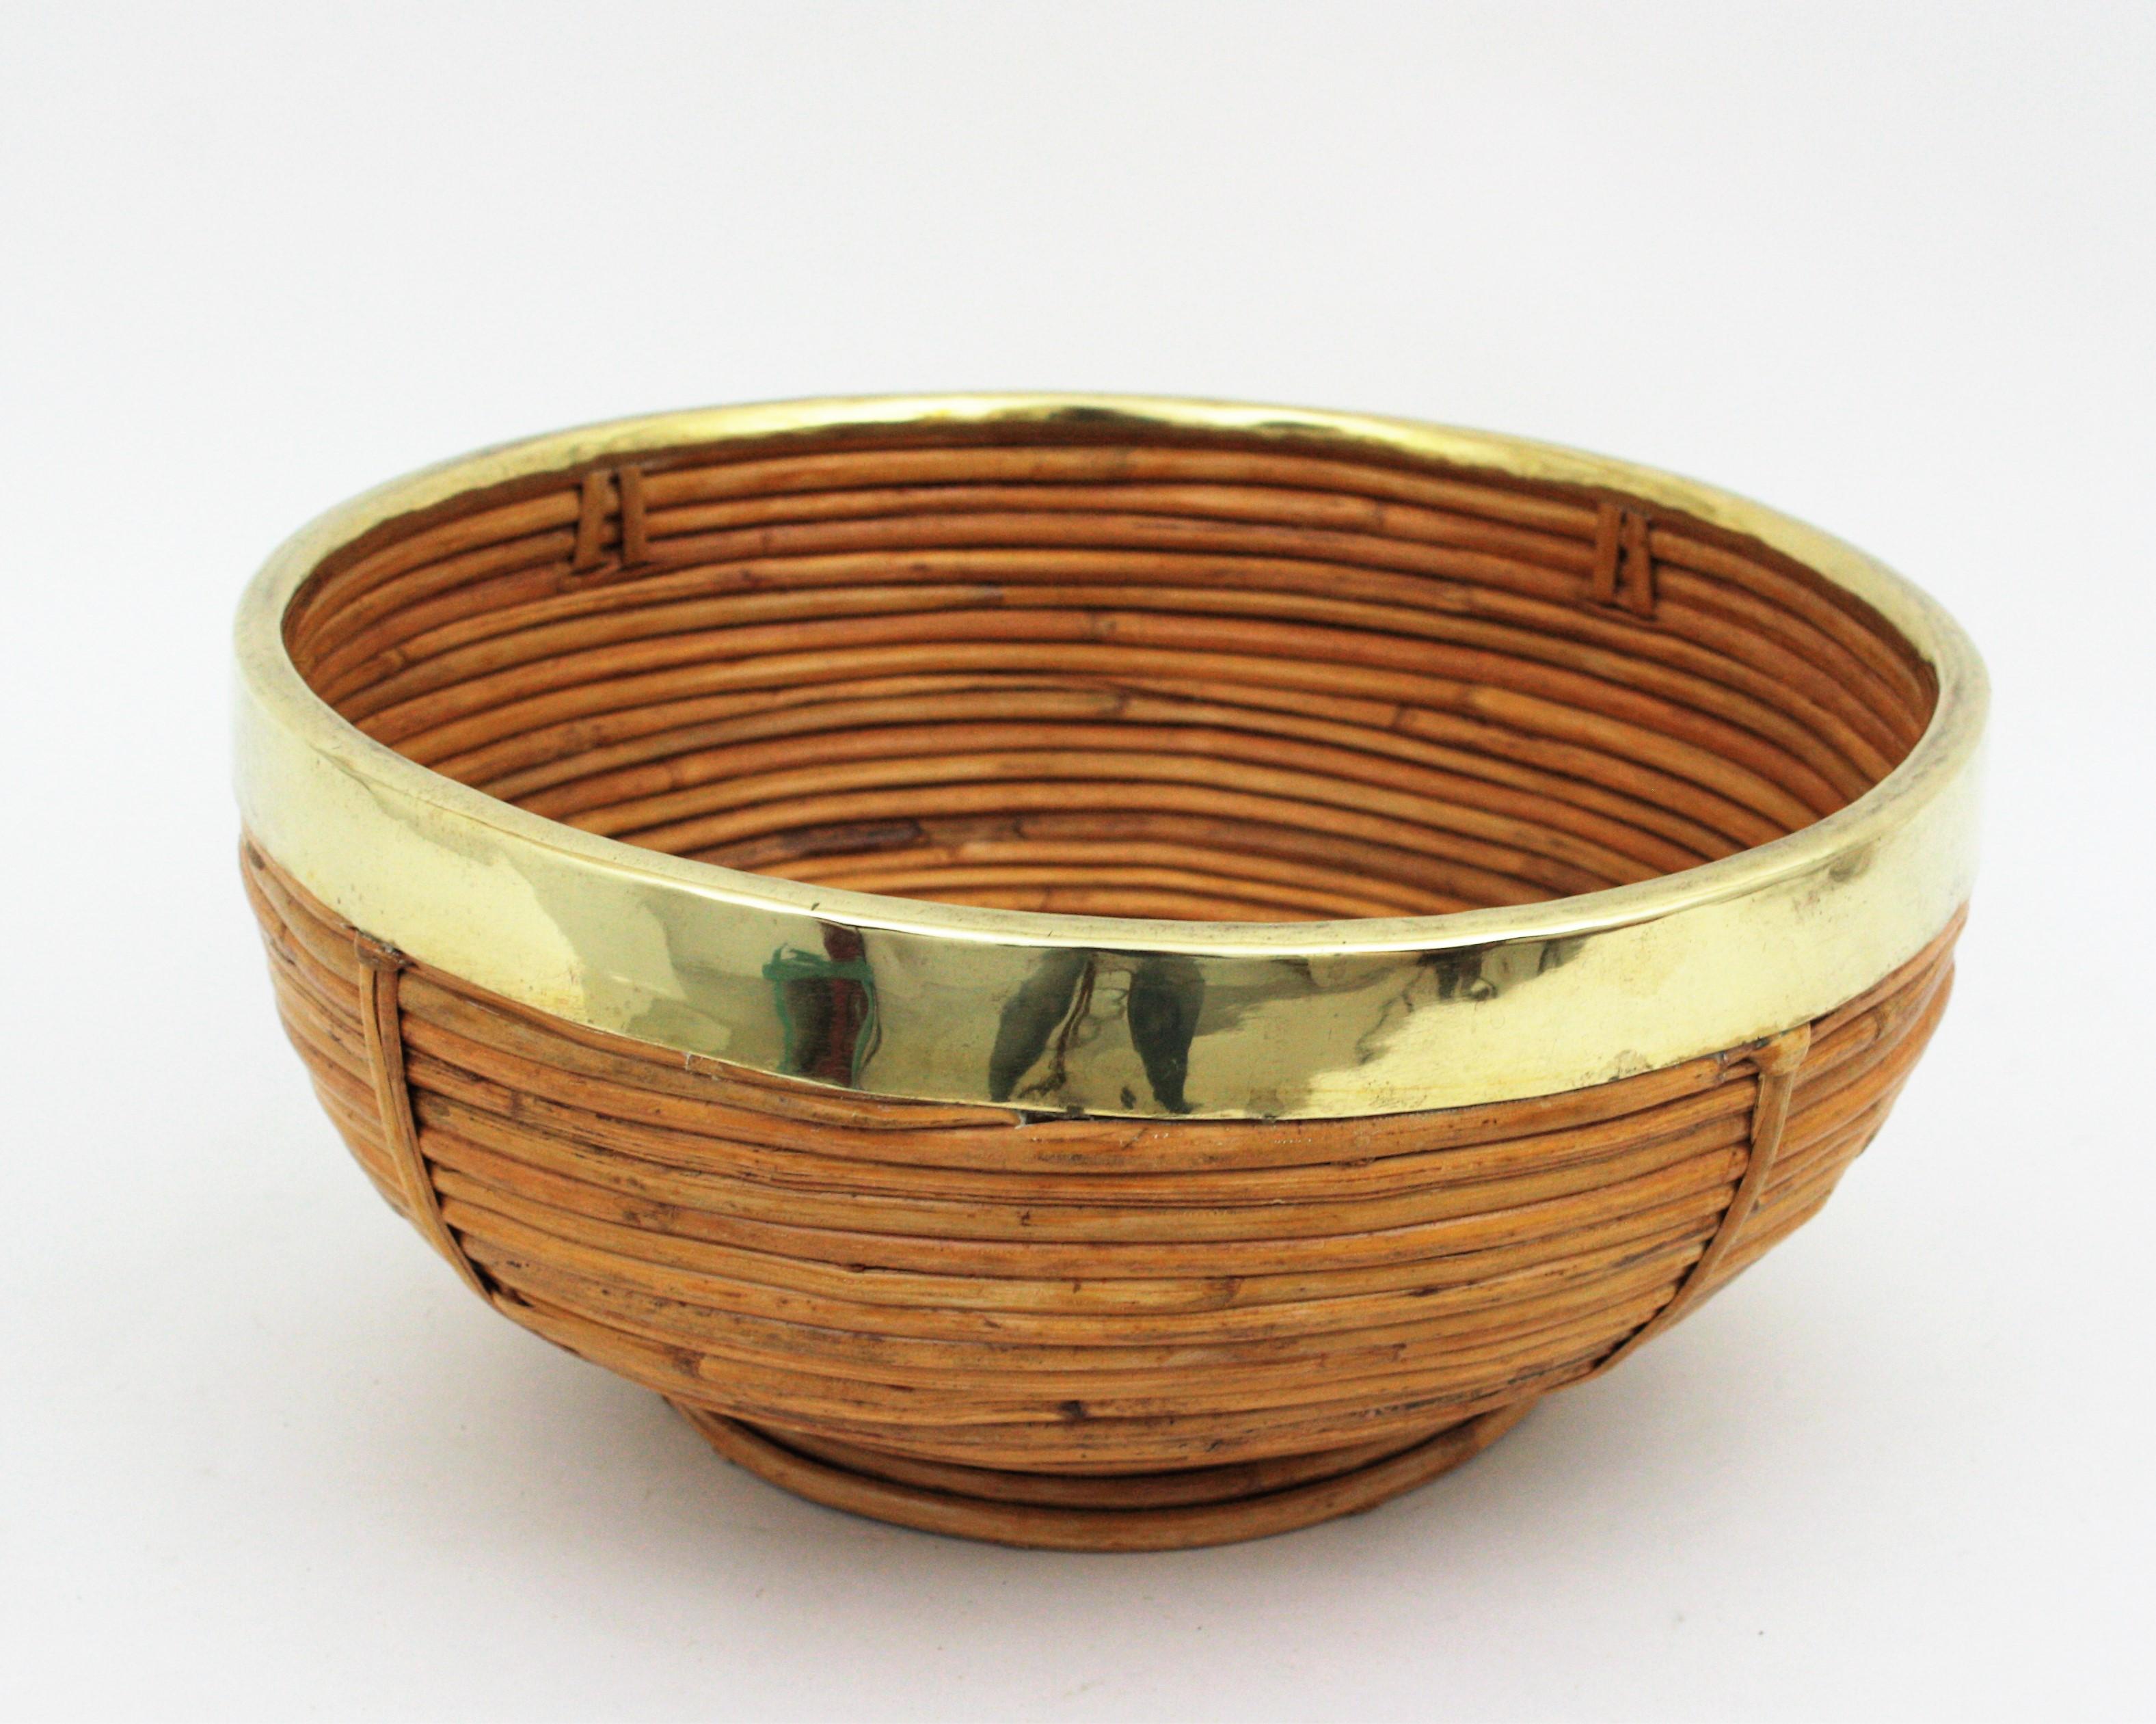 Rattan and Brass Italian Large Basket Bowl Centerpiece, 1970s For Sale 6